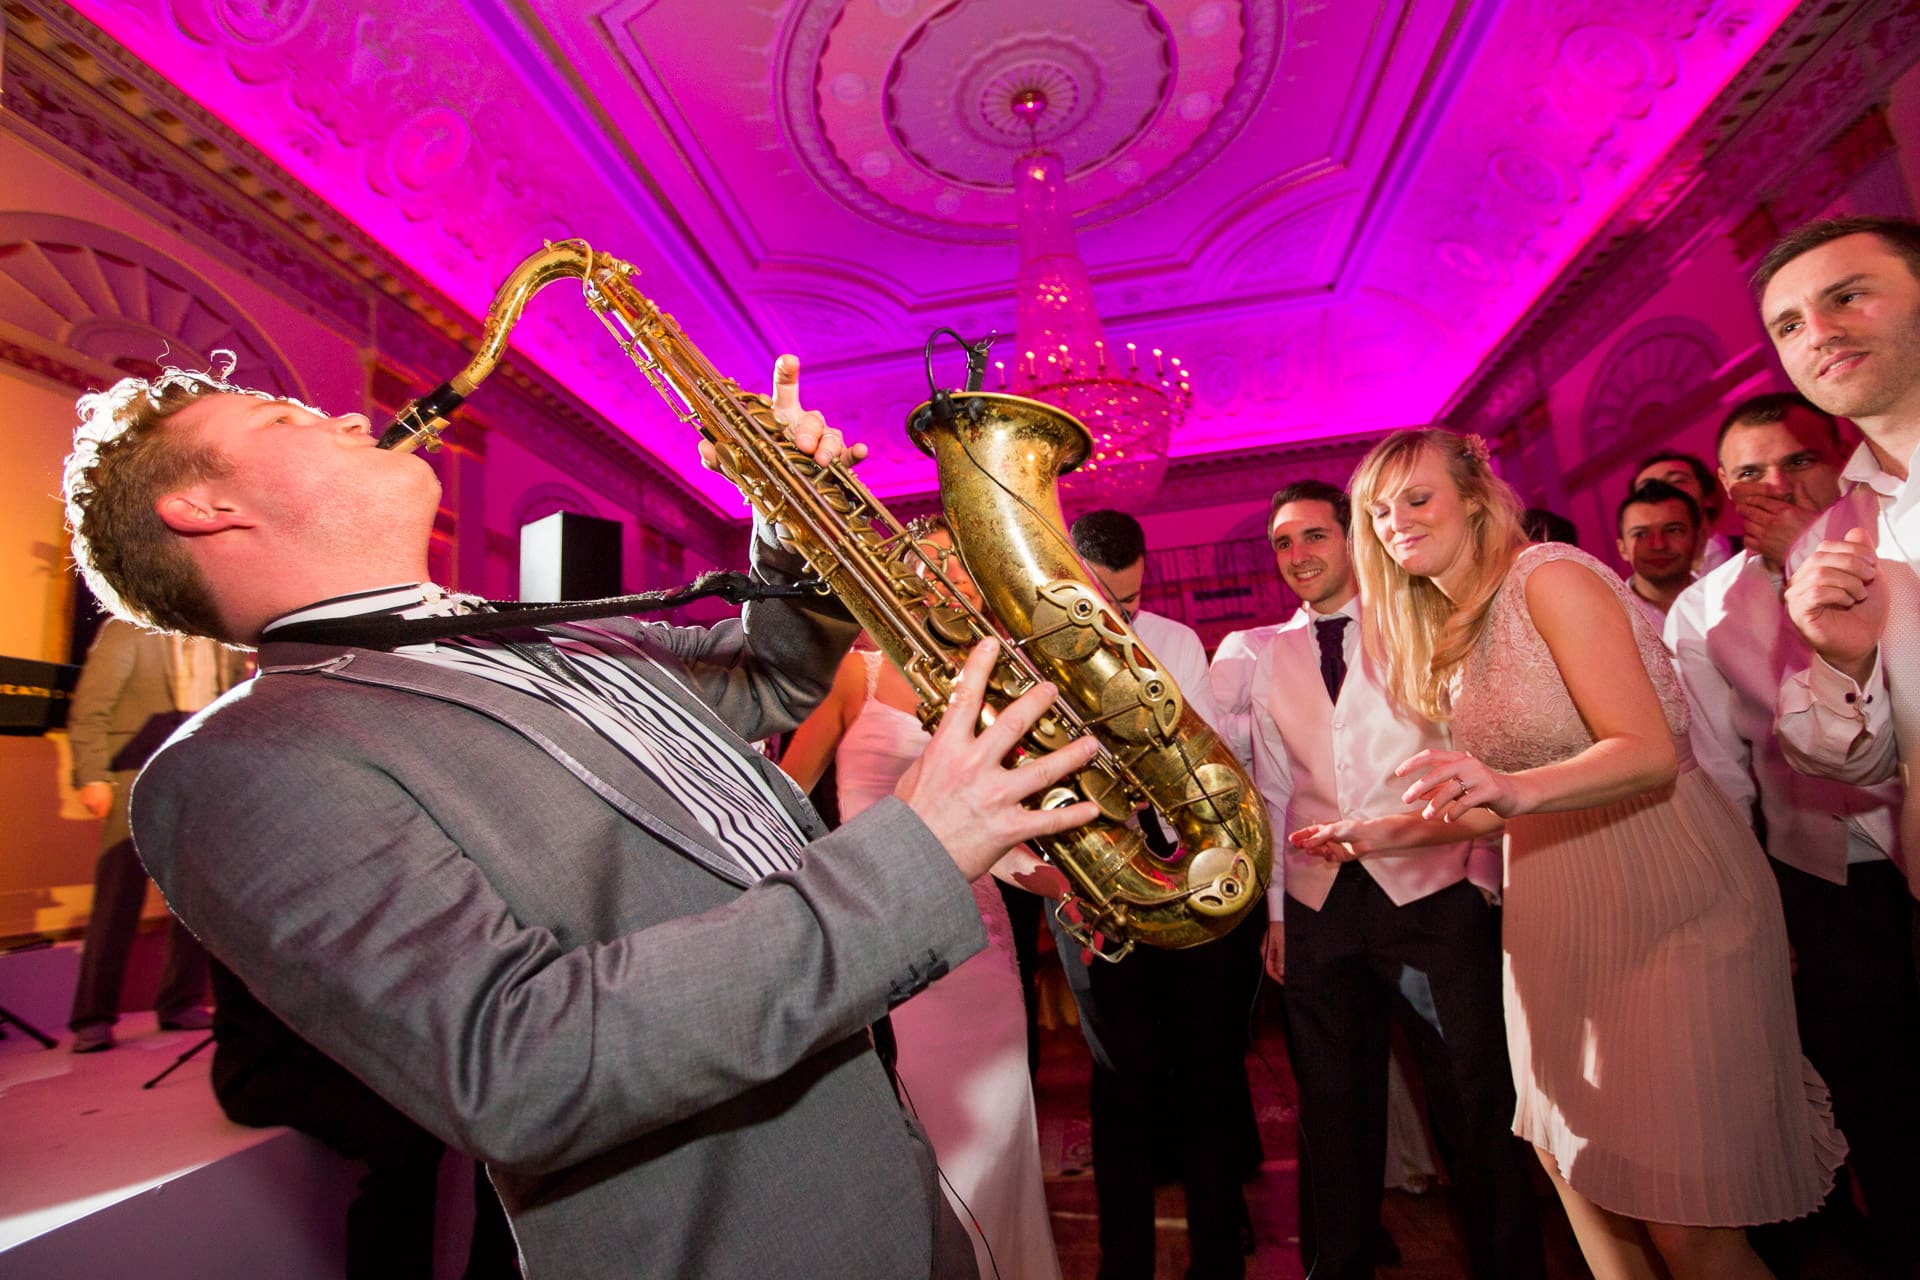 saxophone player is great live entertainment at Plaisterers Hall